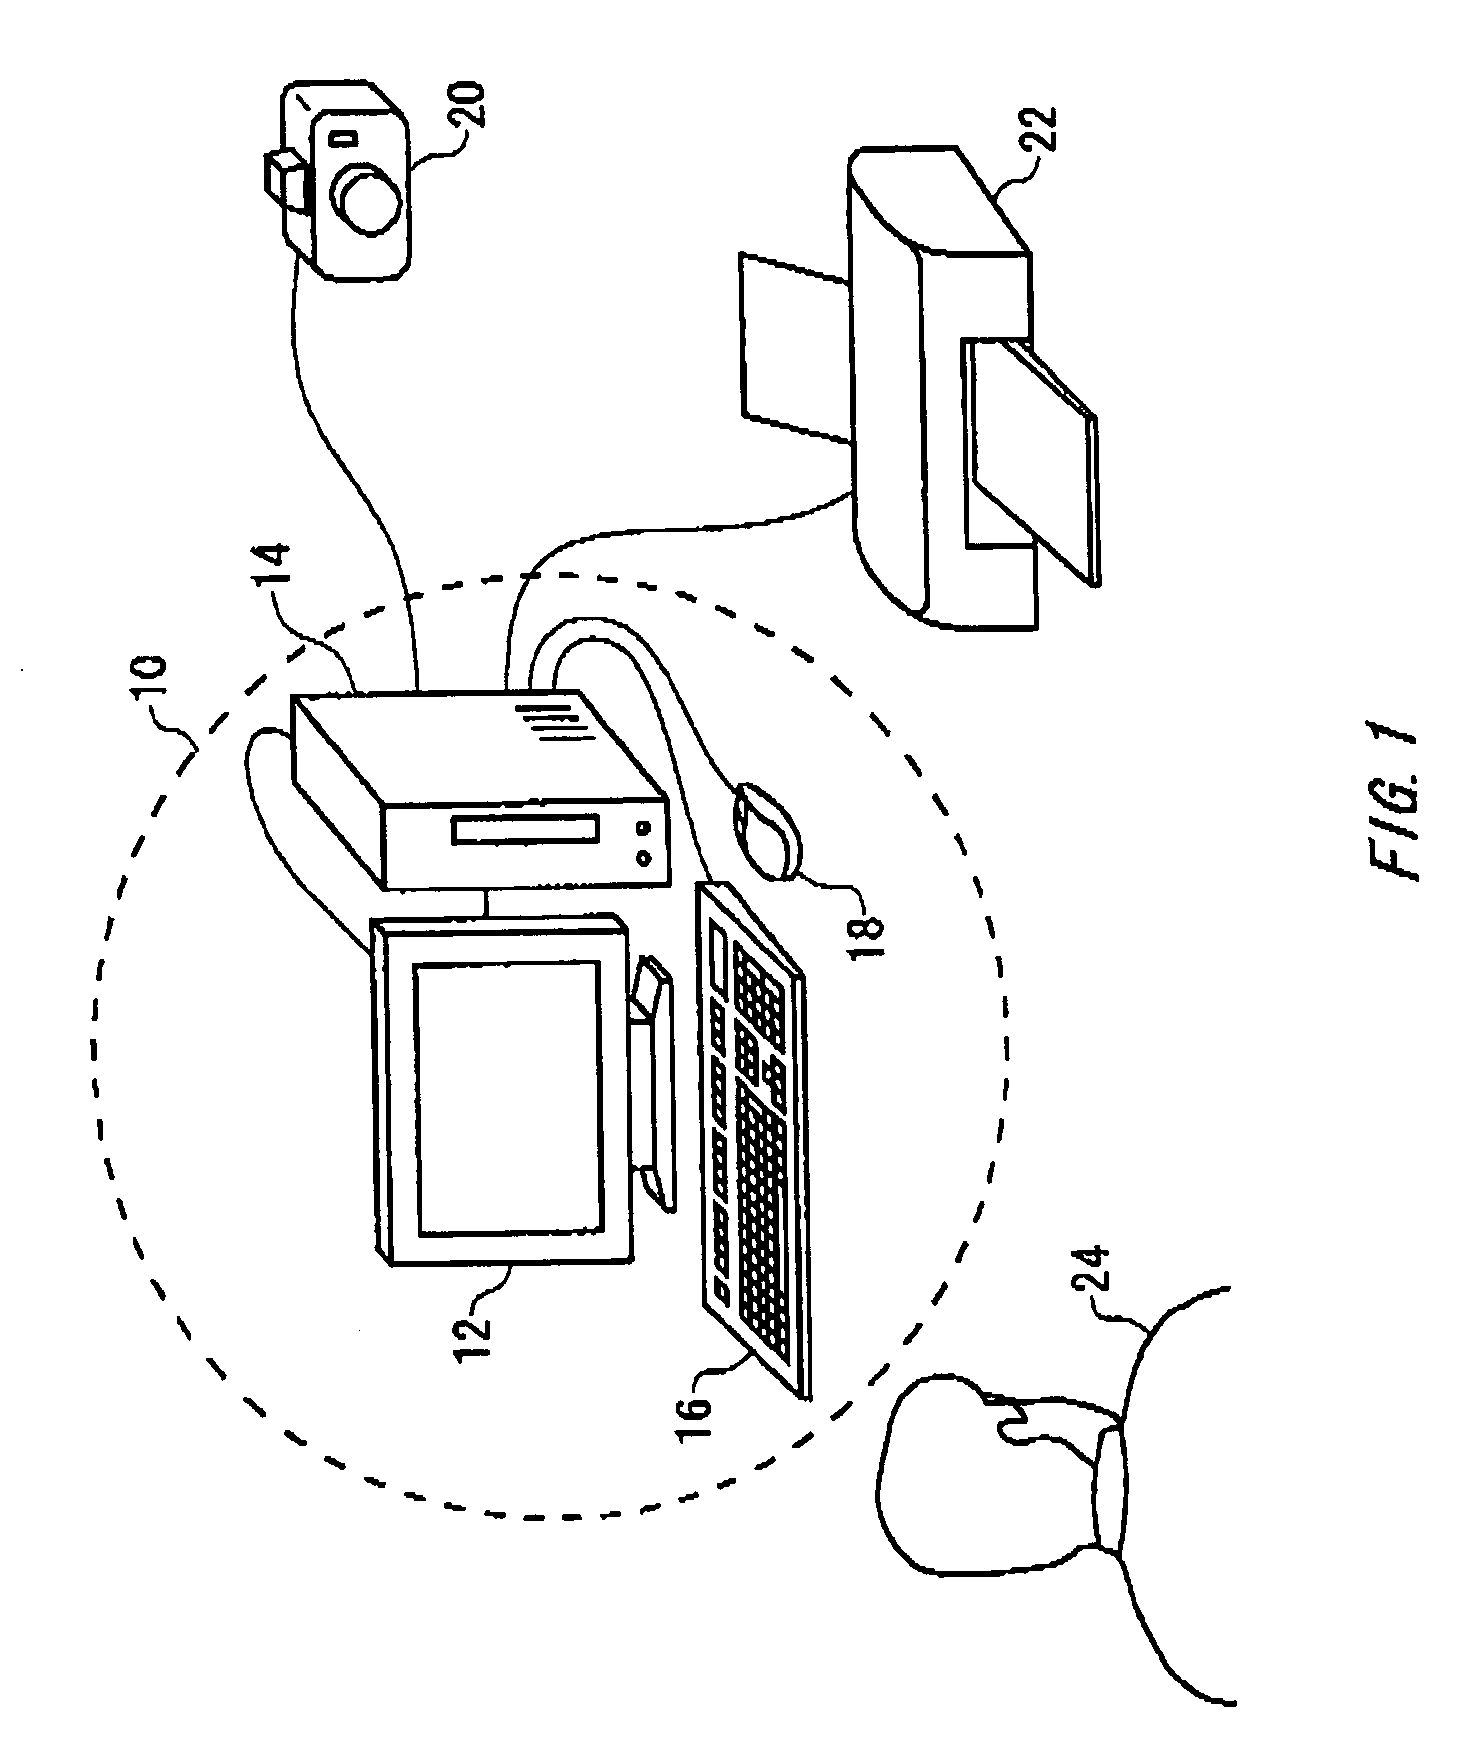 User interface apparatus, method, and computer readable recording medium for interacting with child windows in an application window